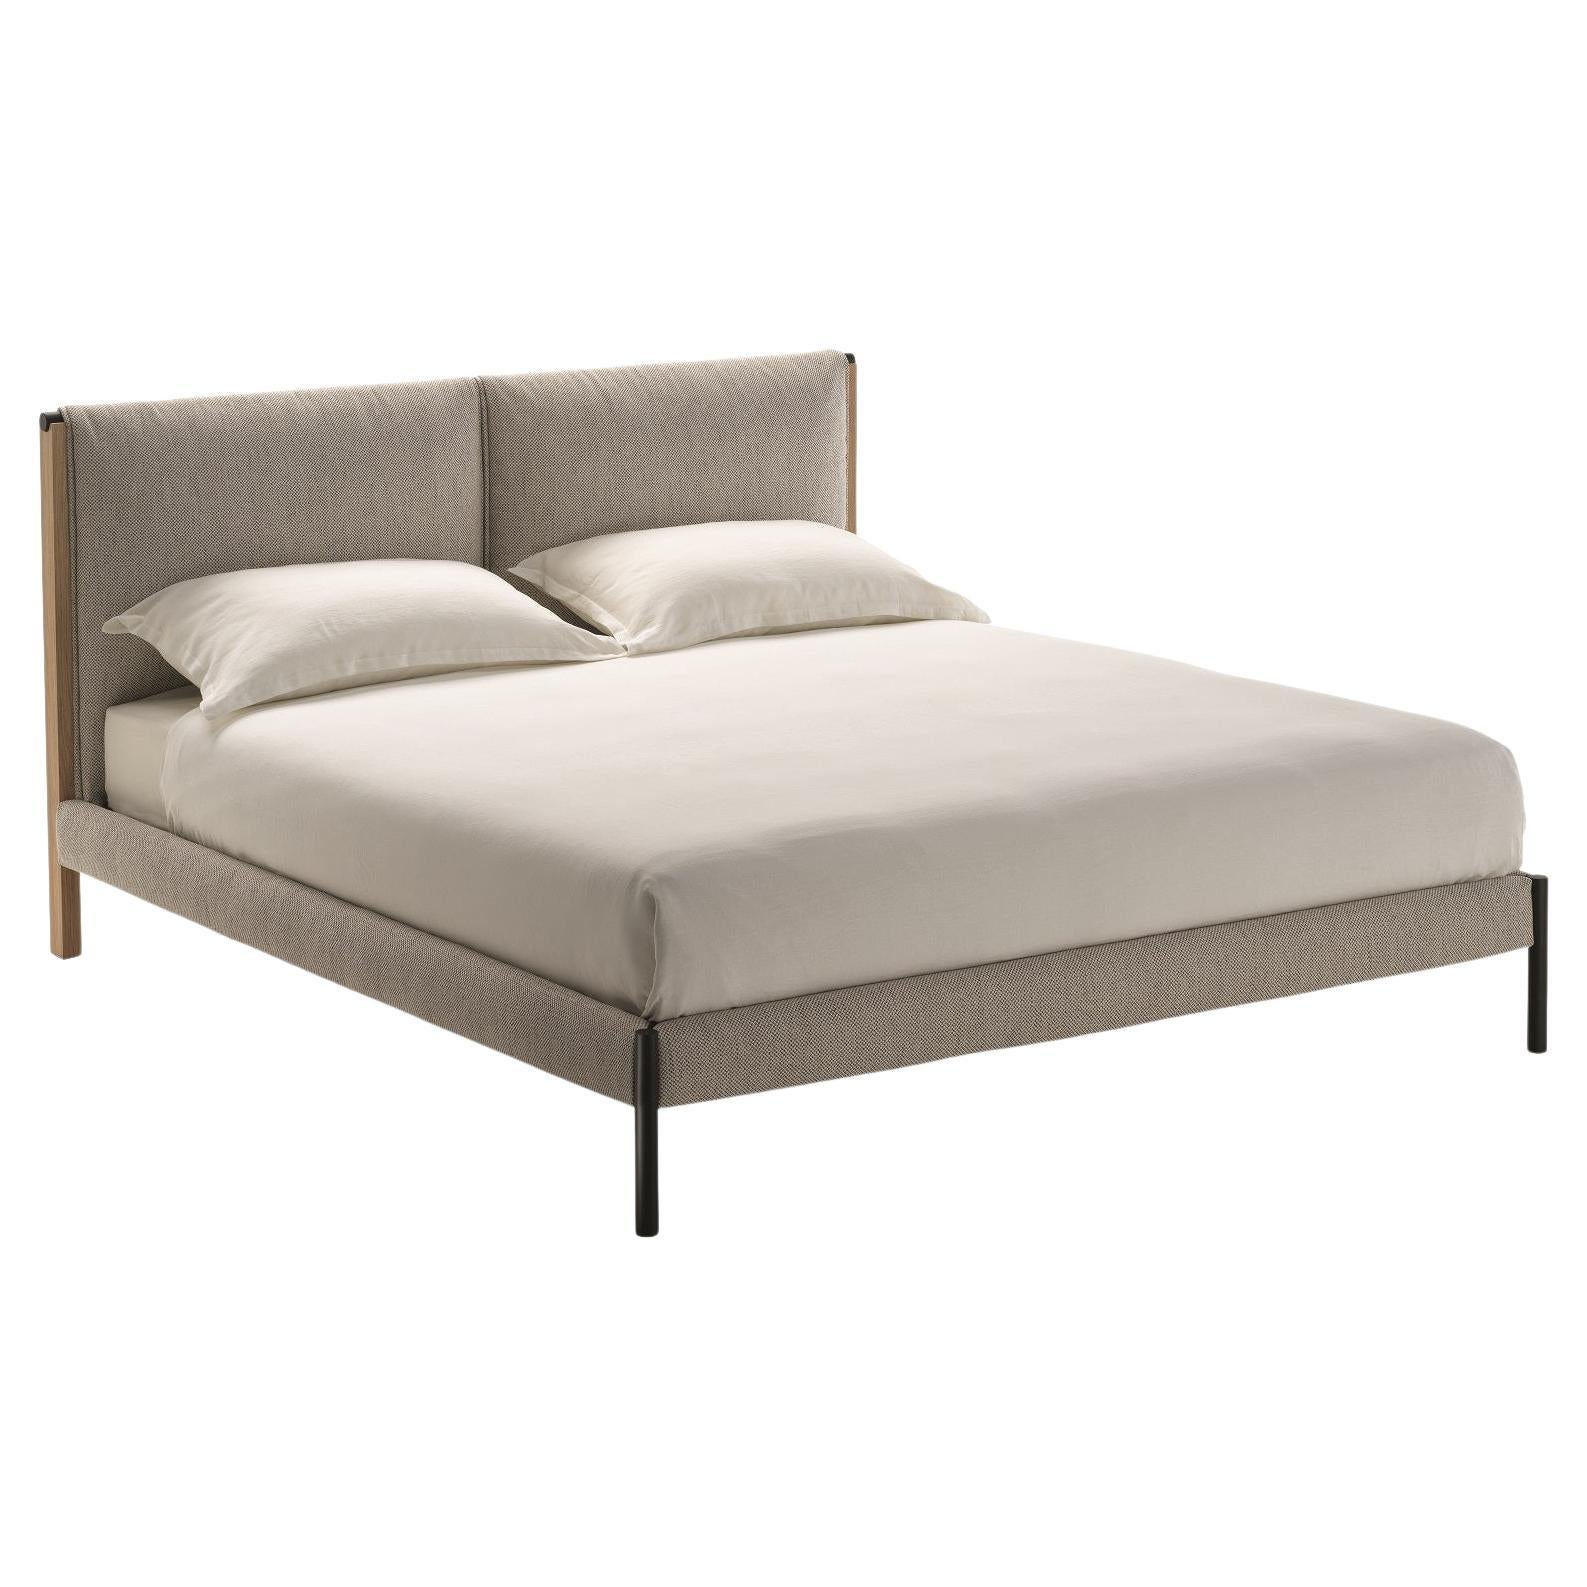 Zanotta Queen Size Ricordi Bed with Single Springing in Toce Upholstery For Sale